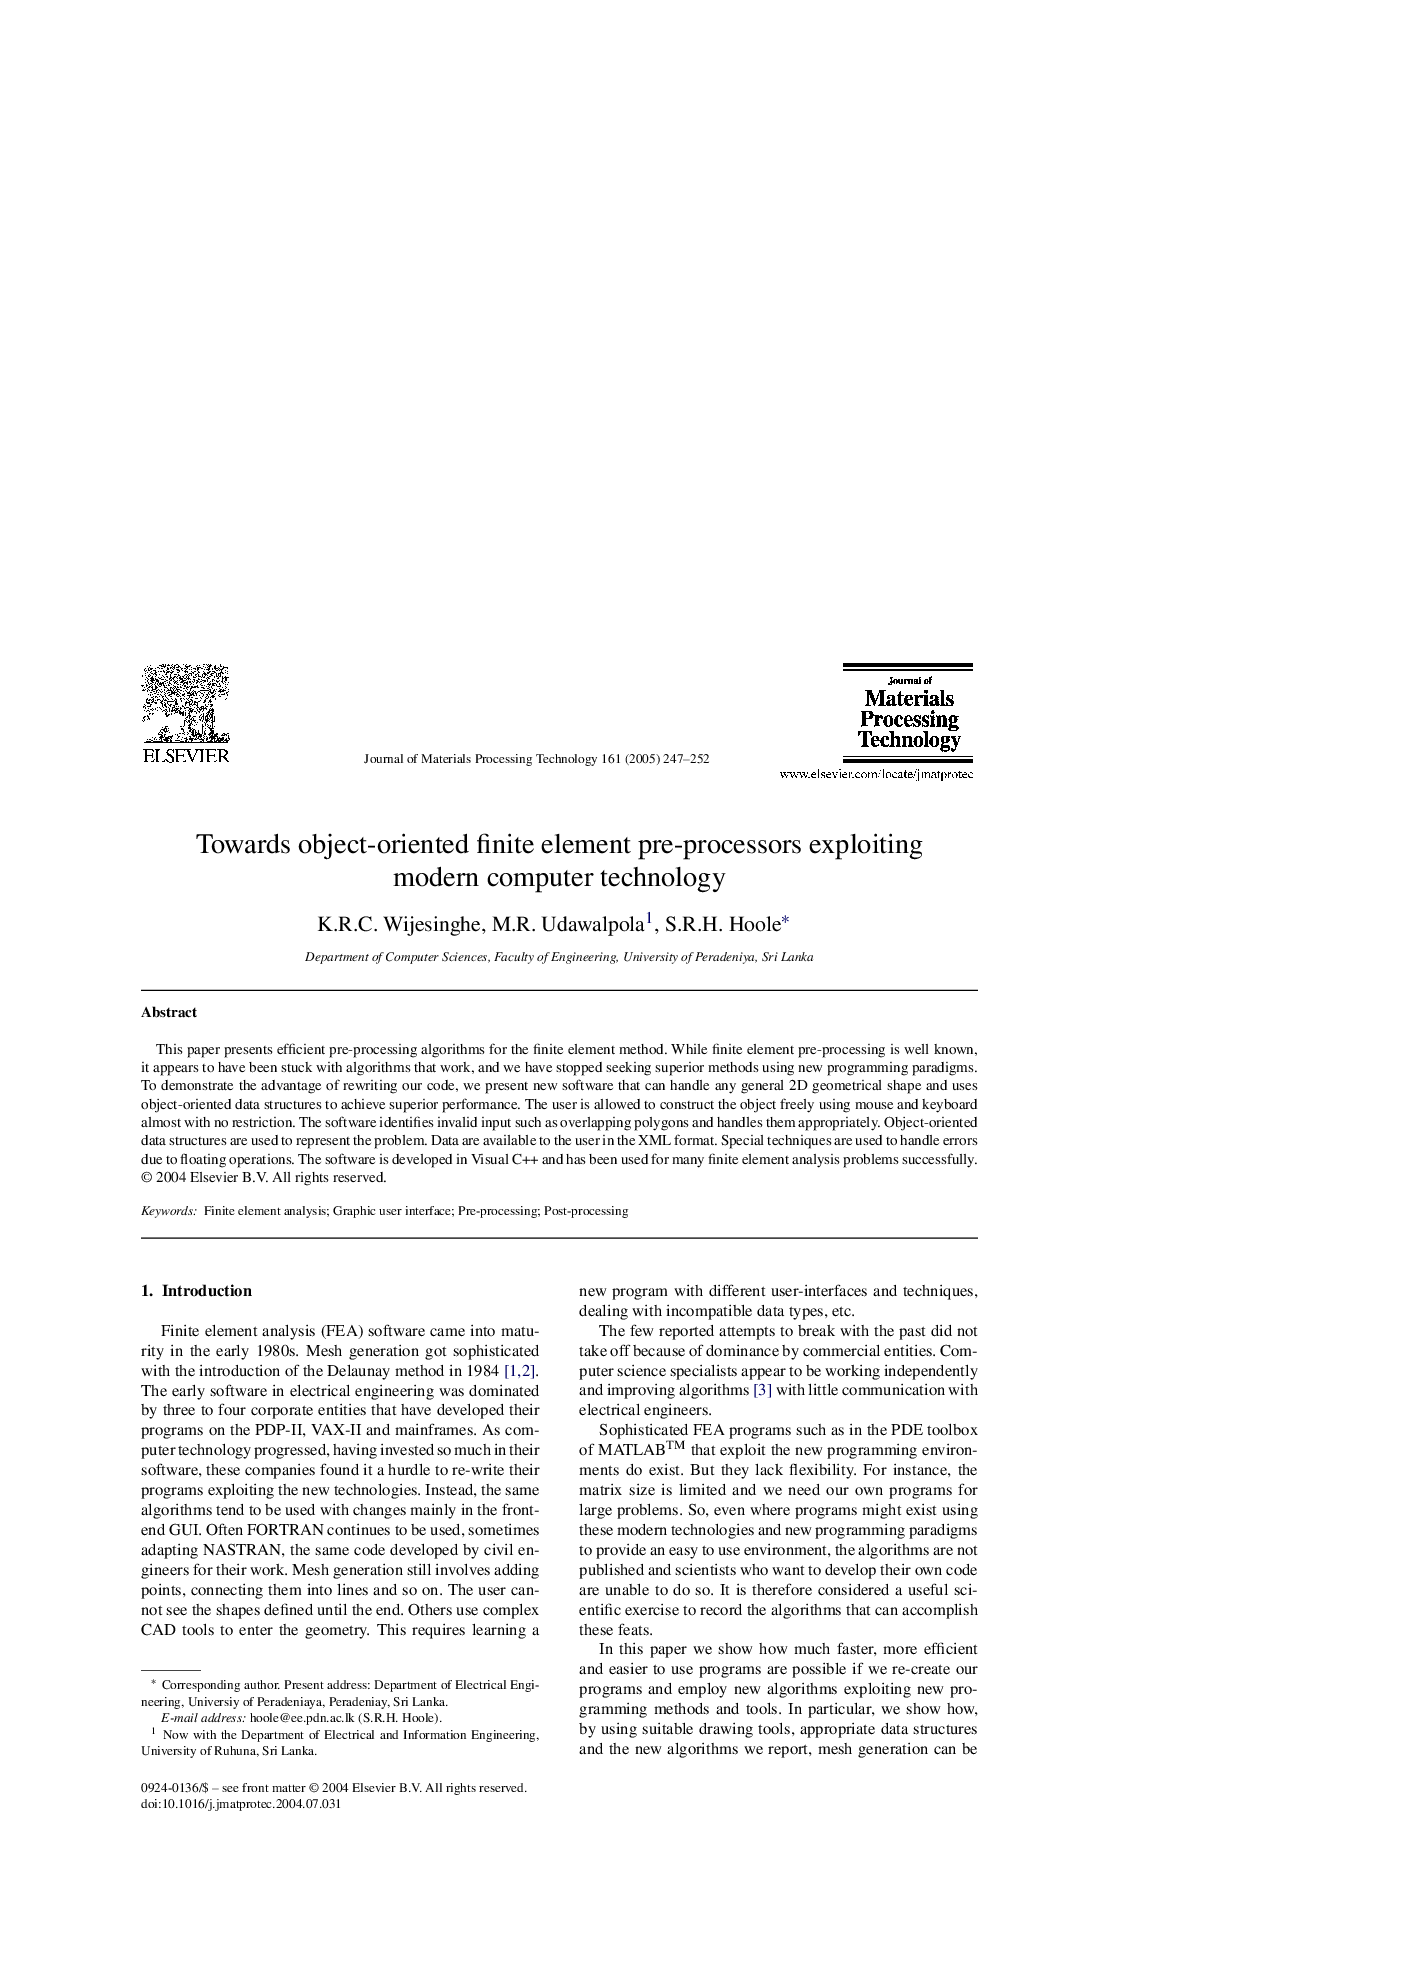 Towards object-oriented finite element pre-processors exploiting modern computer technology